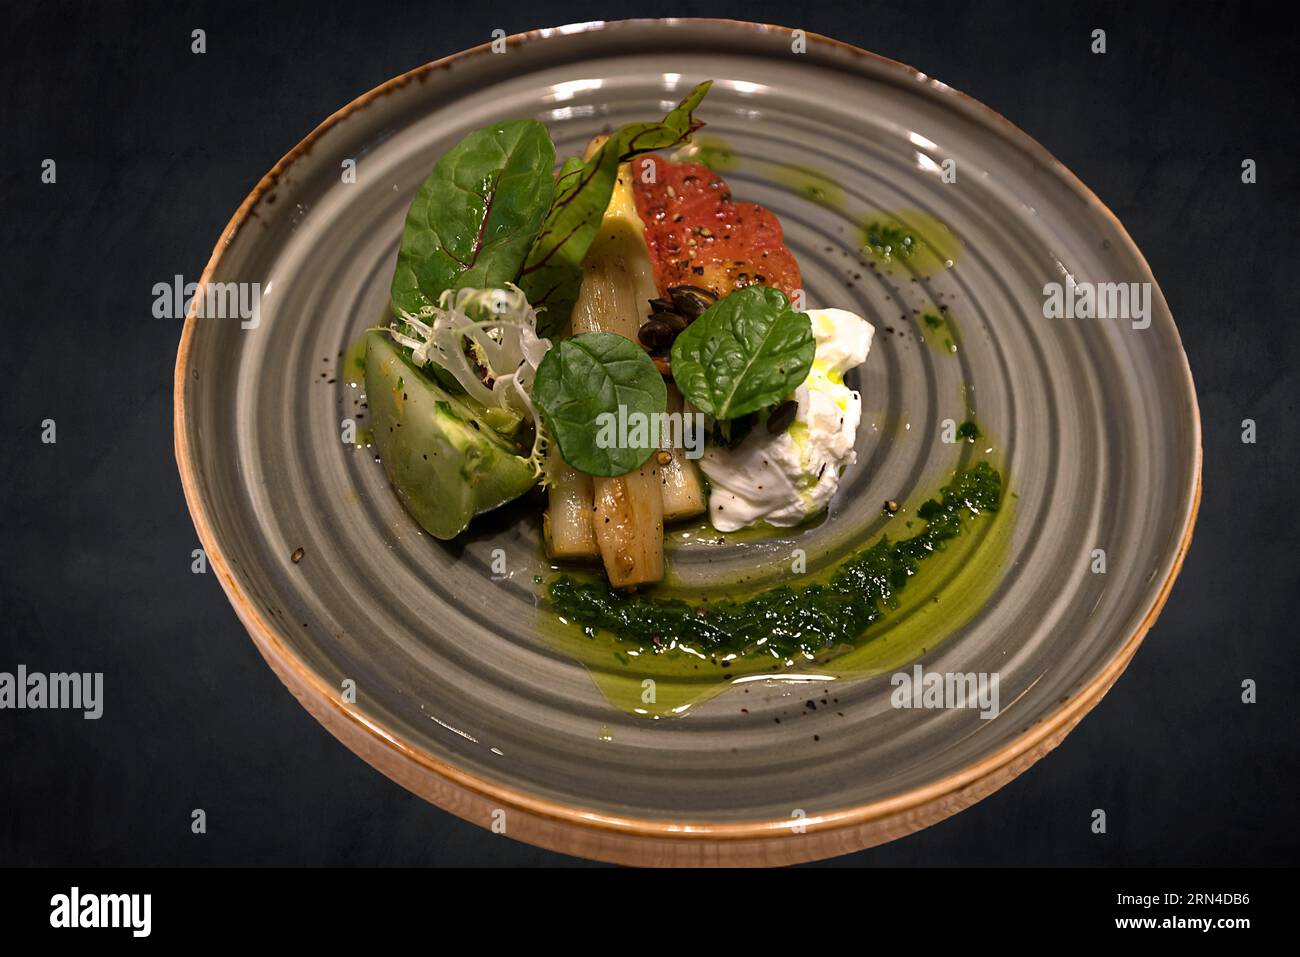 Starter plate with asparagus, lettuce, feta cheese and tomatoes on a dark background, Baden-Wuerttemberg, Germany Stock Photo